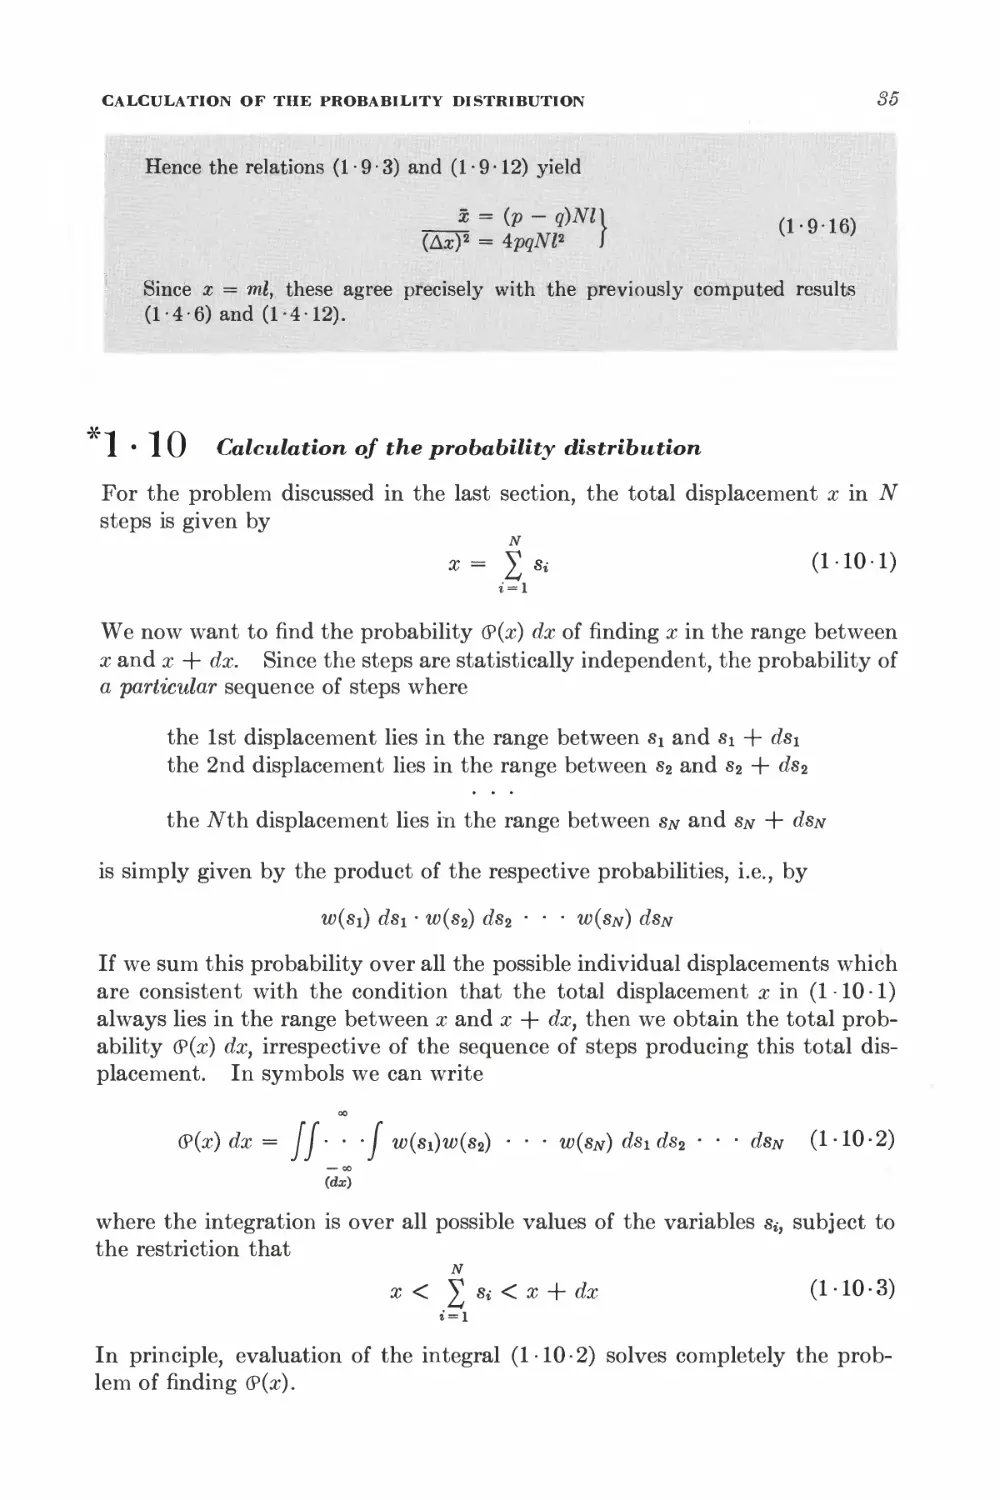 1.10 Calculation of the probability distribution